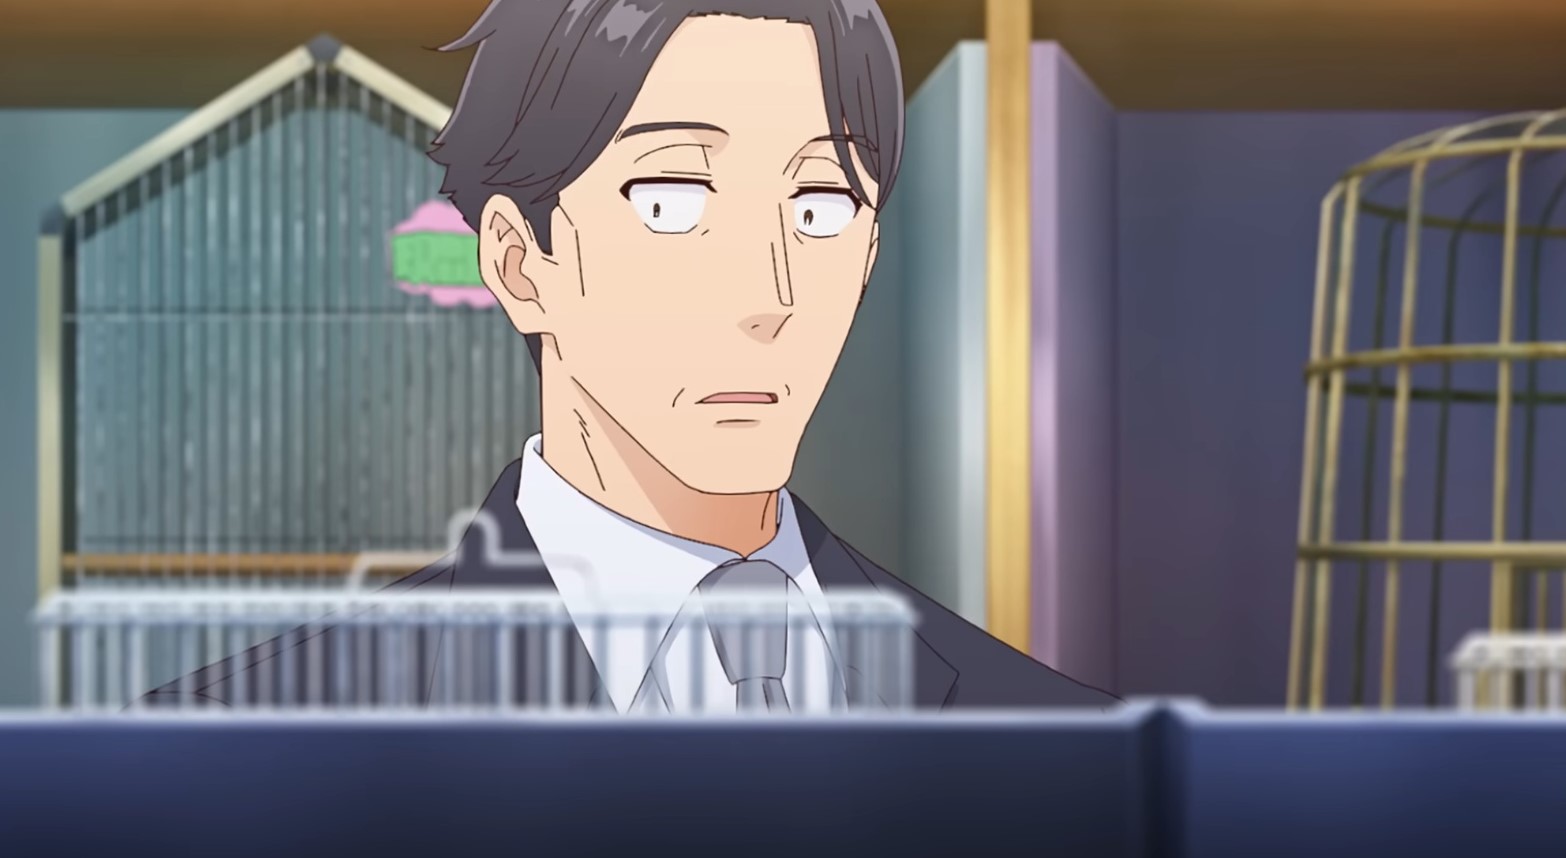 Sasaki, the unfufilled corporate worker